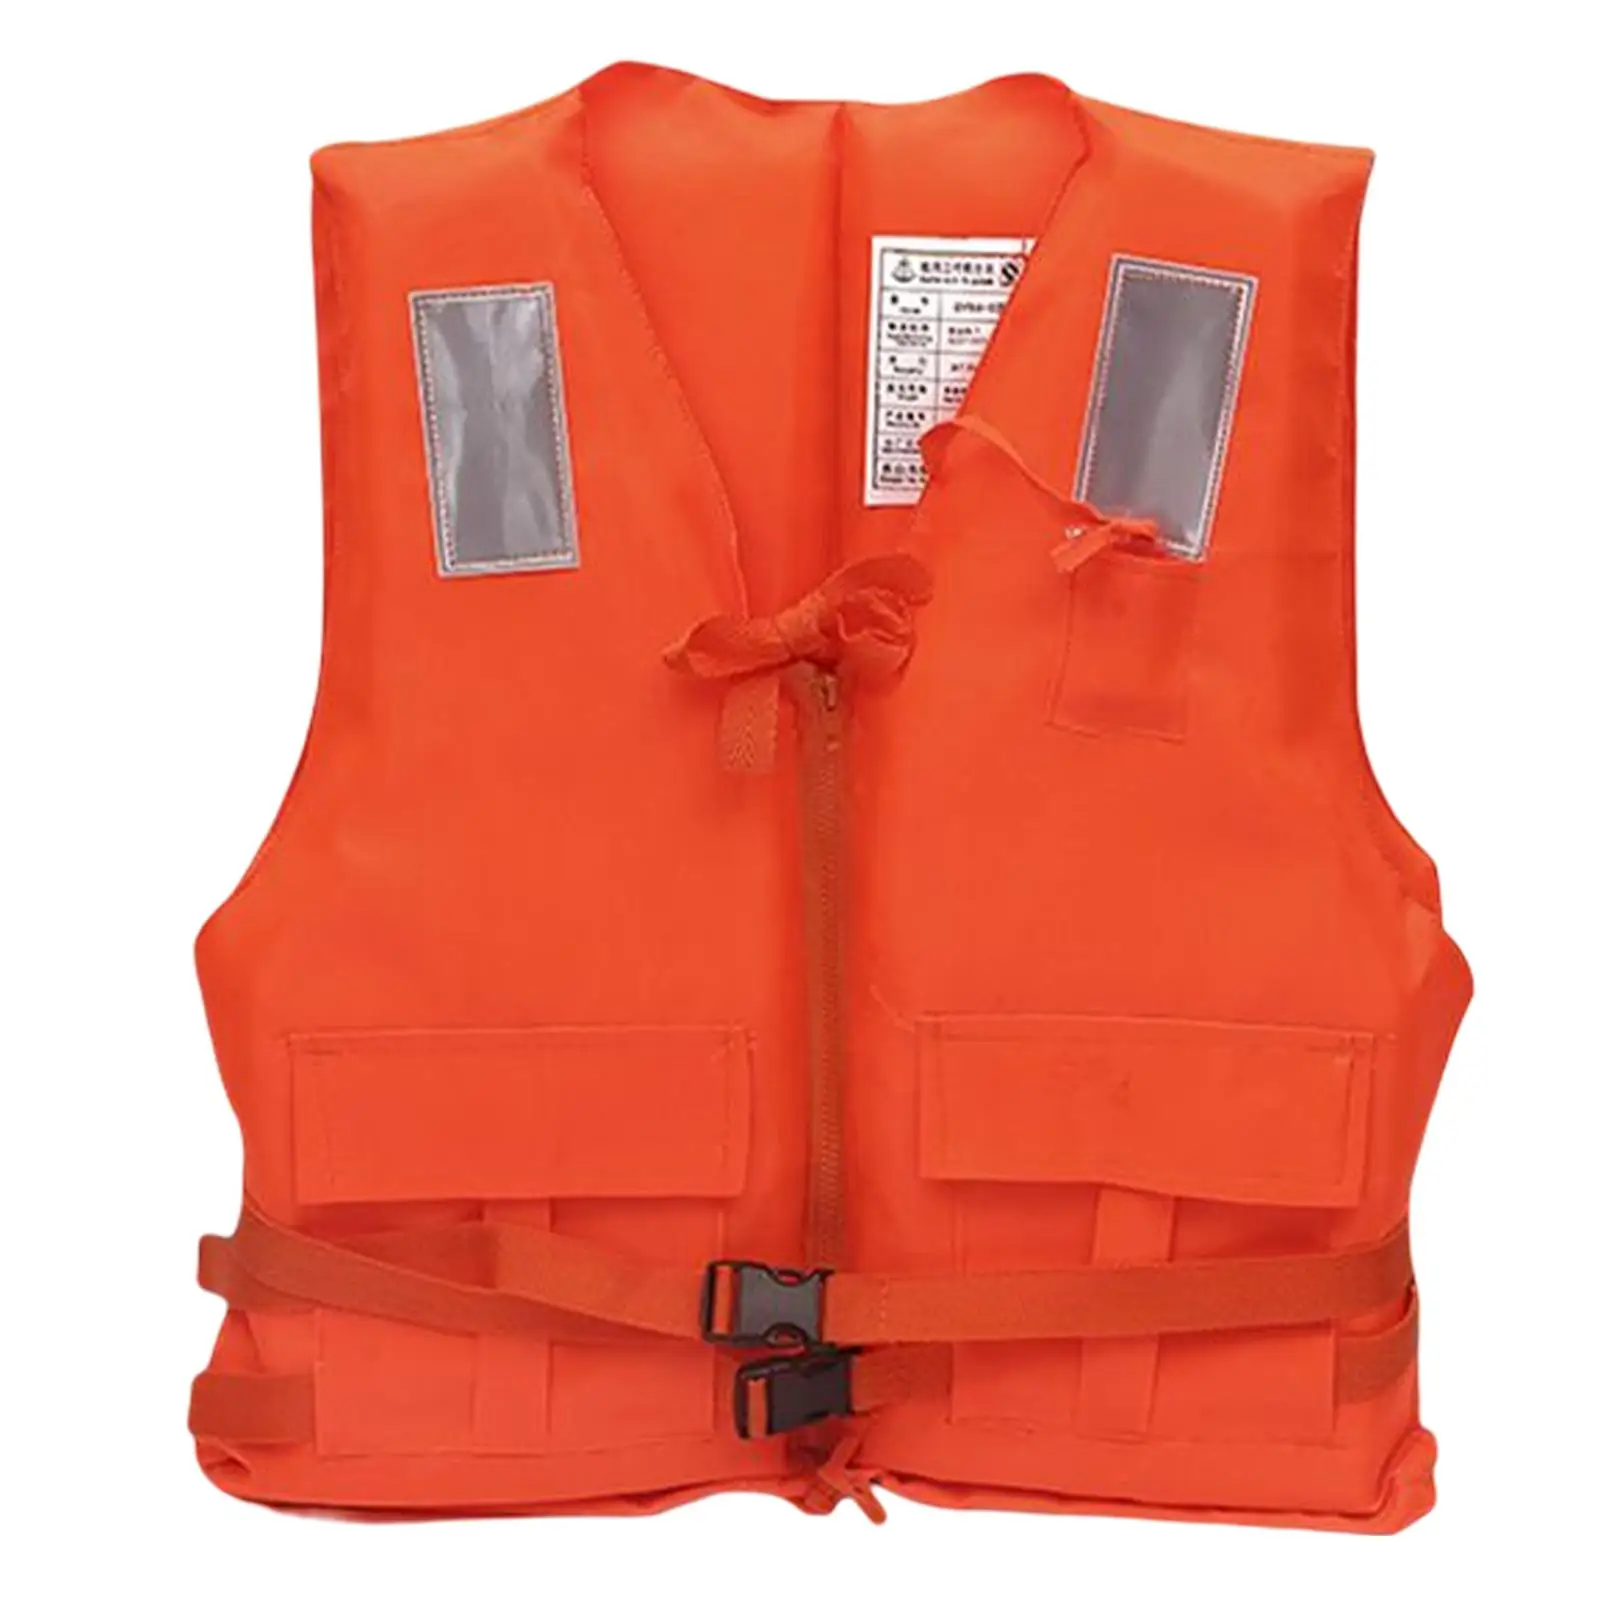 Outdoor Life Jacket Fly Fishing Jacket Reflective Strip Buoyancy Aid Adult Life Vest for Drifting Boating Wimming Adult Sailing